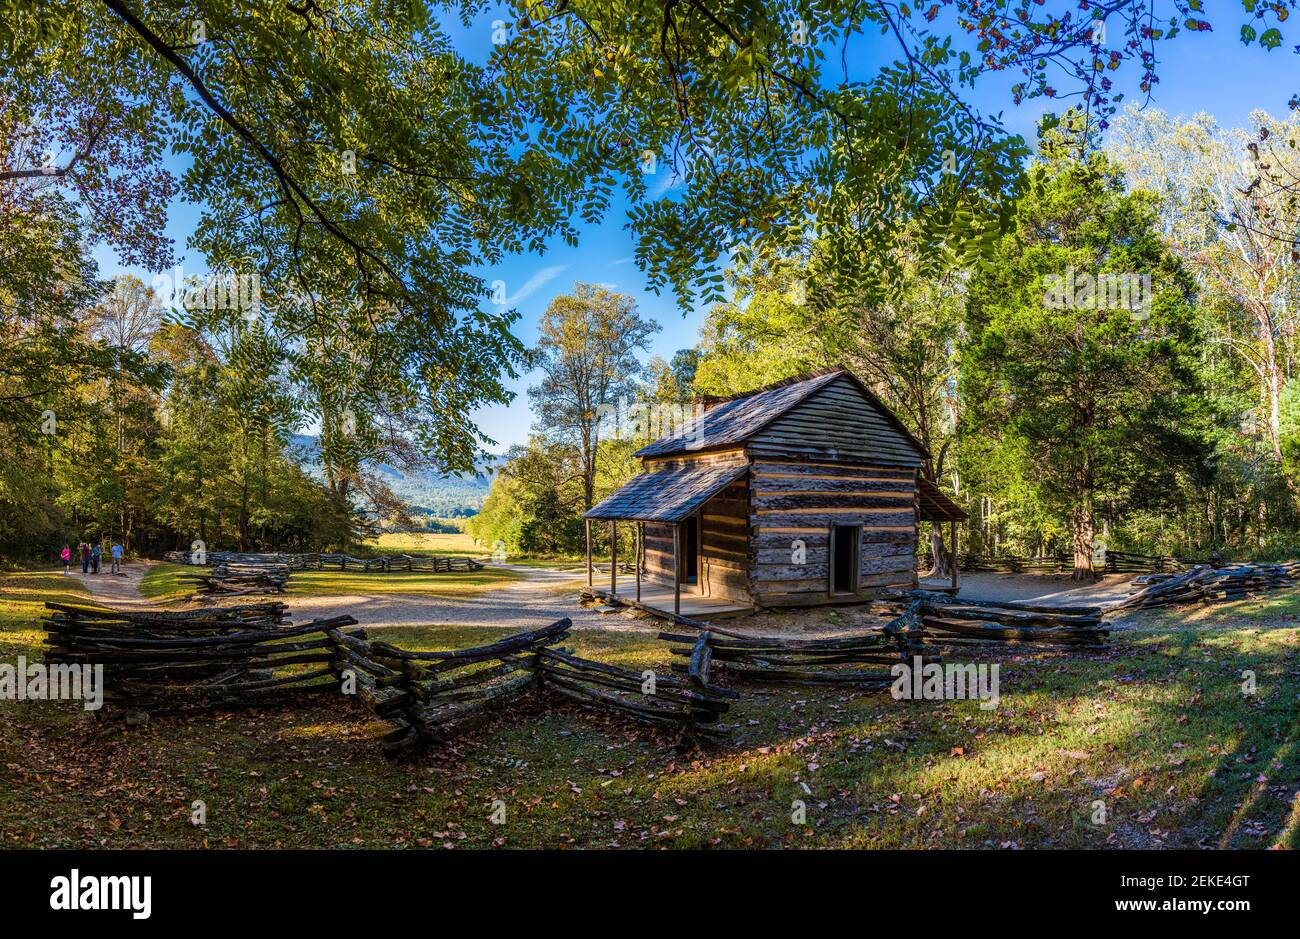 Capanna di tronchi nella foresta, John Oliver Place, Cades Cove, Great Smoky Mountains National Park, Tennessee, USA Foto Stock